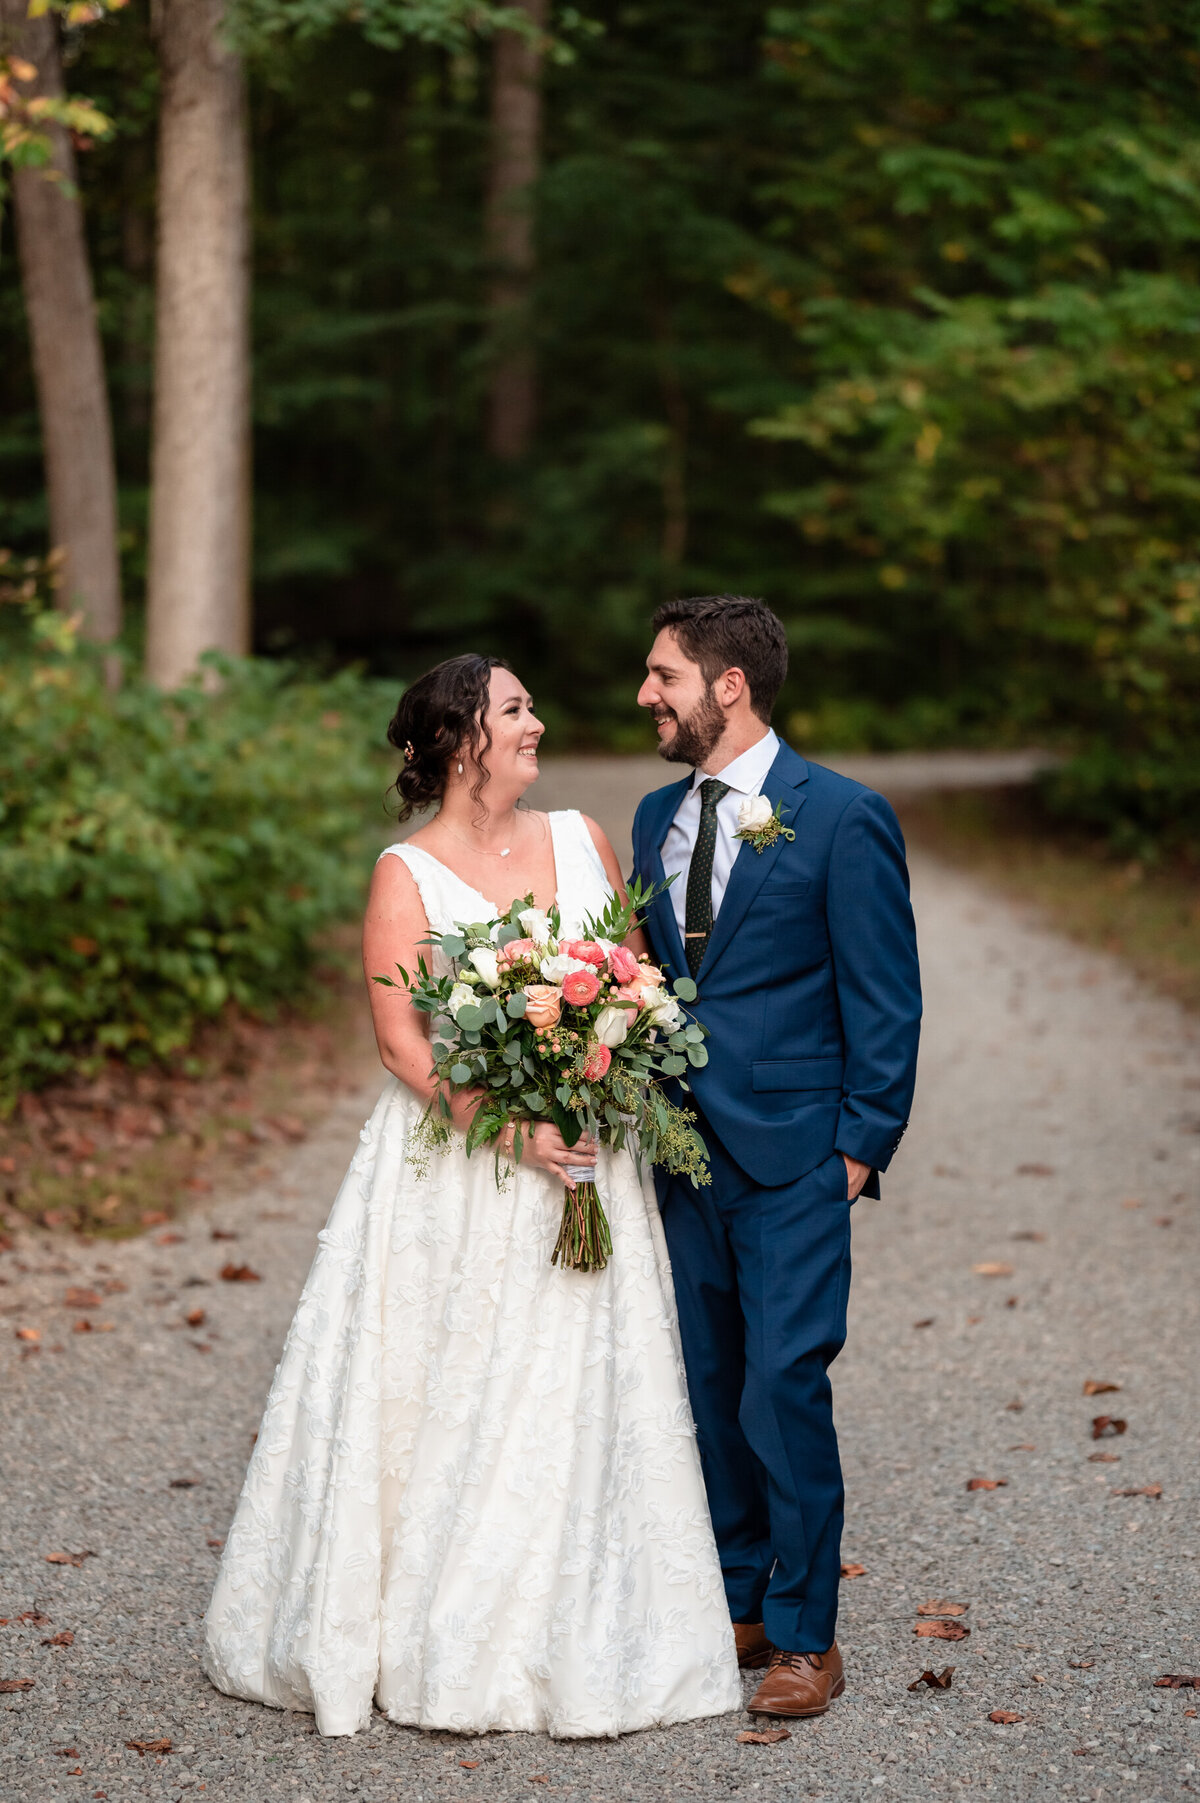 EmmiClaire Photography Weddings-11